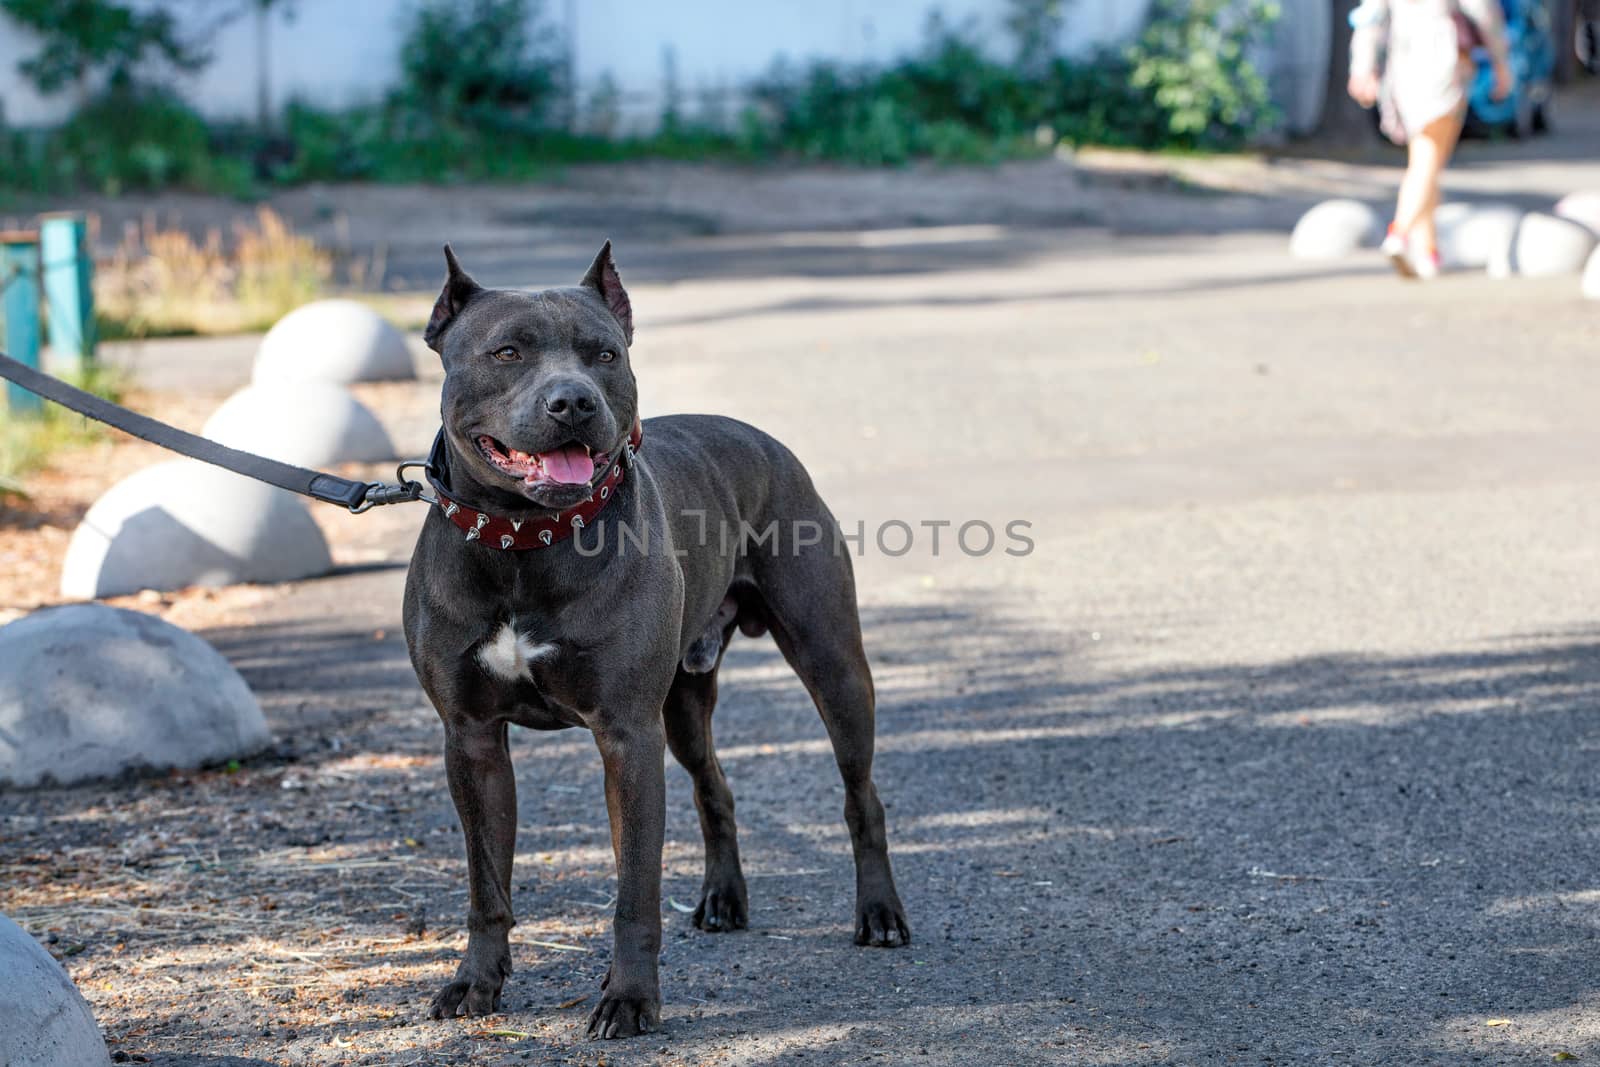 Beautiful portrait and robust build of a black Staffordshire Bull Terrier with a red collar walking down a city street.